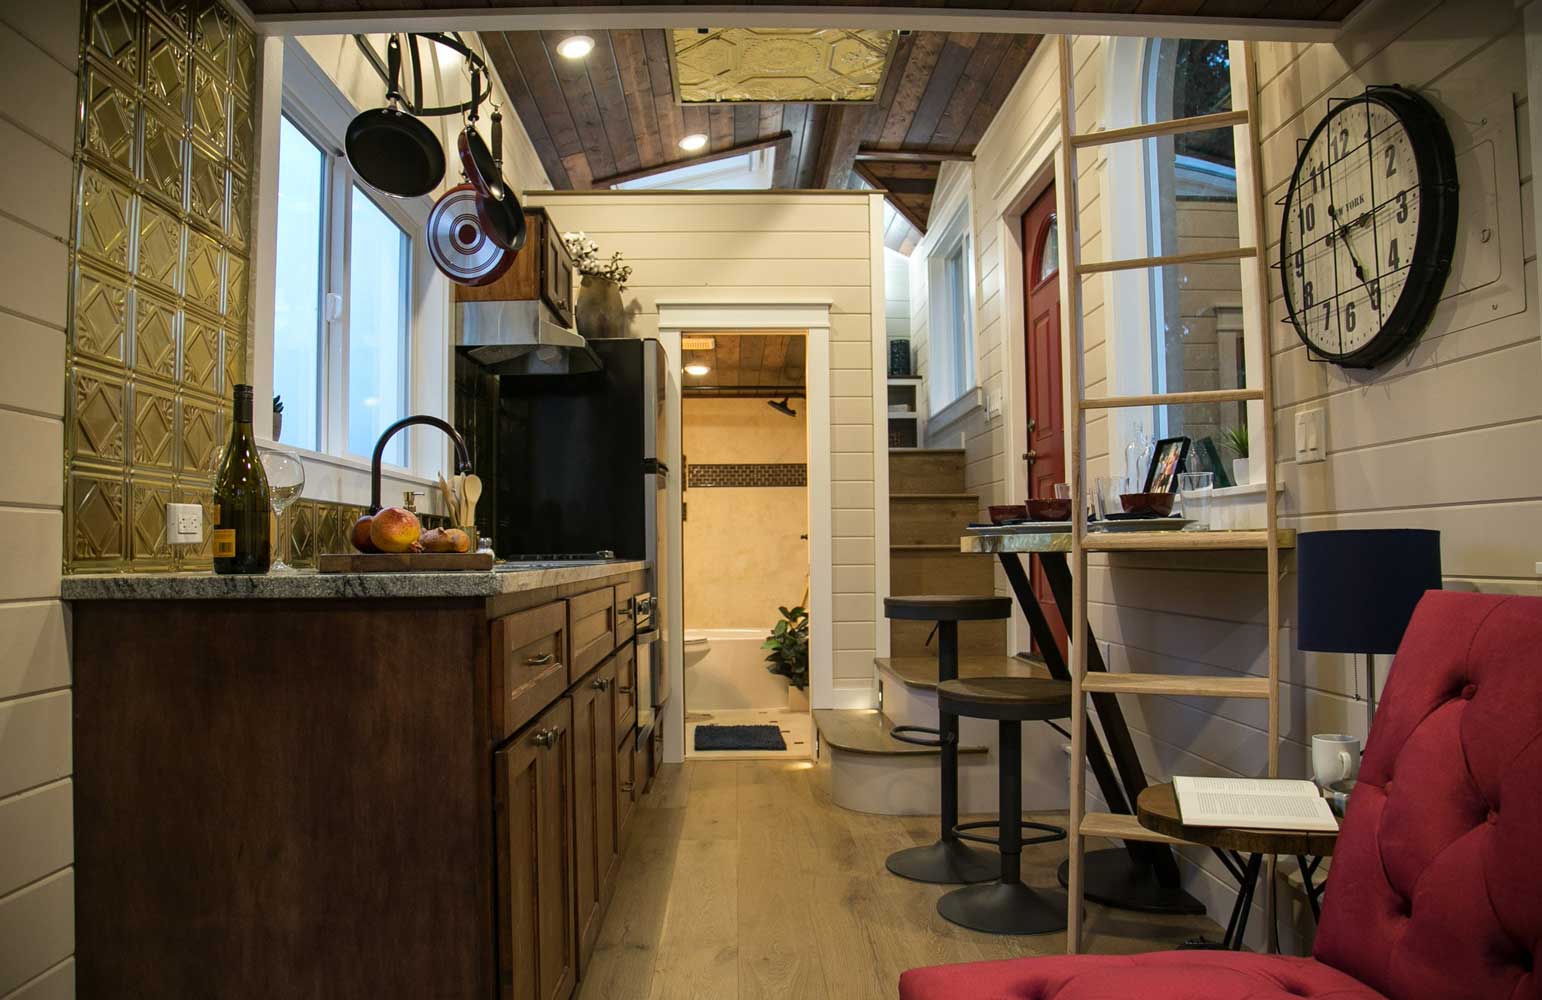 Theater Home custom tiny house's interior with kitchen and dining counter